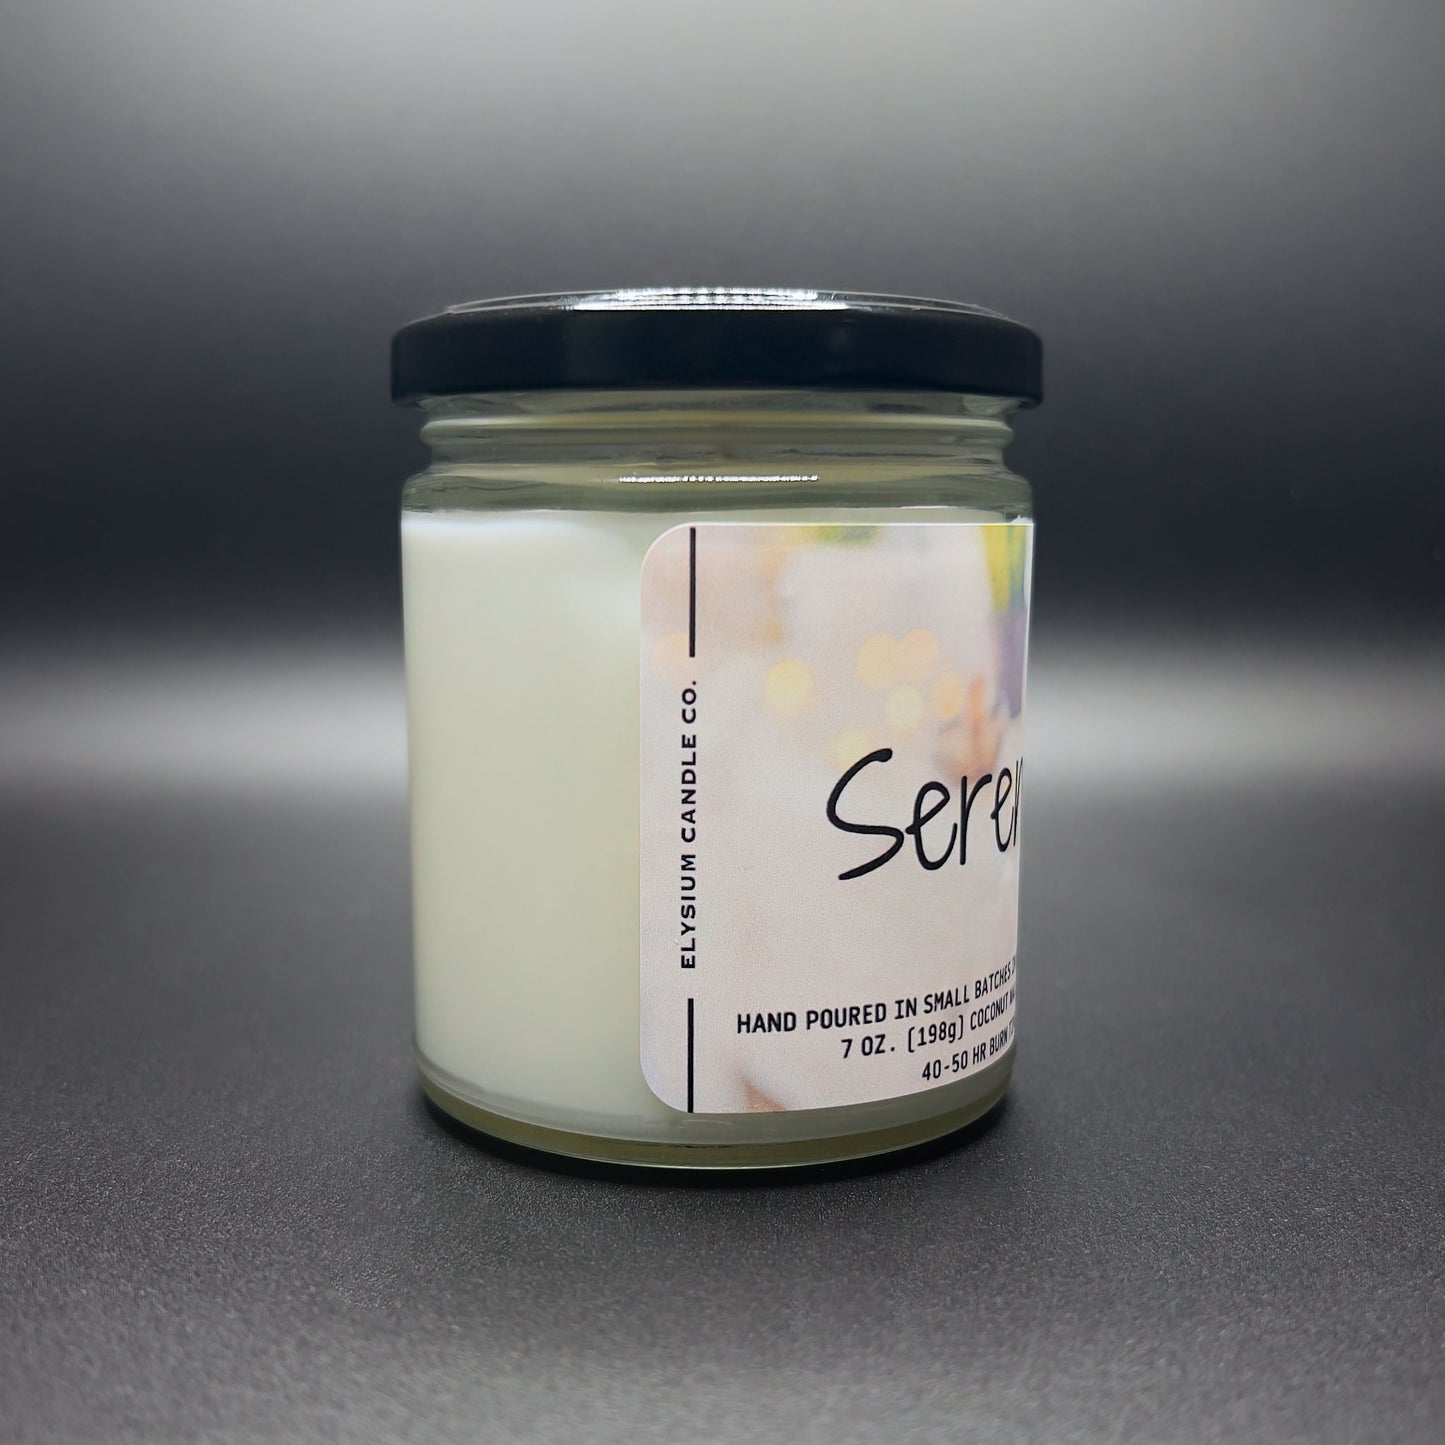 Serenity Candle